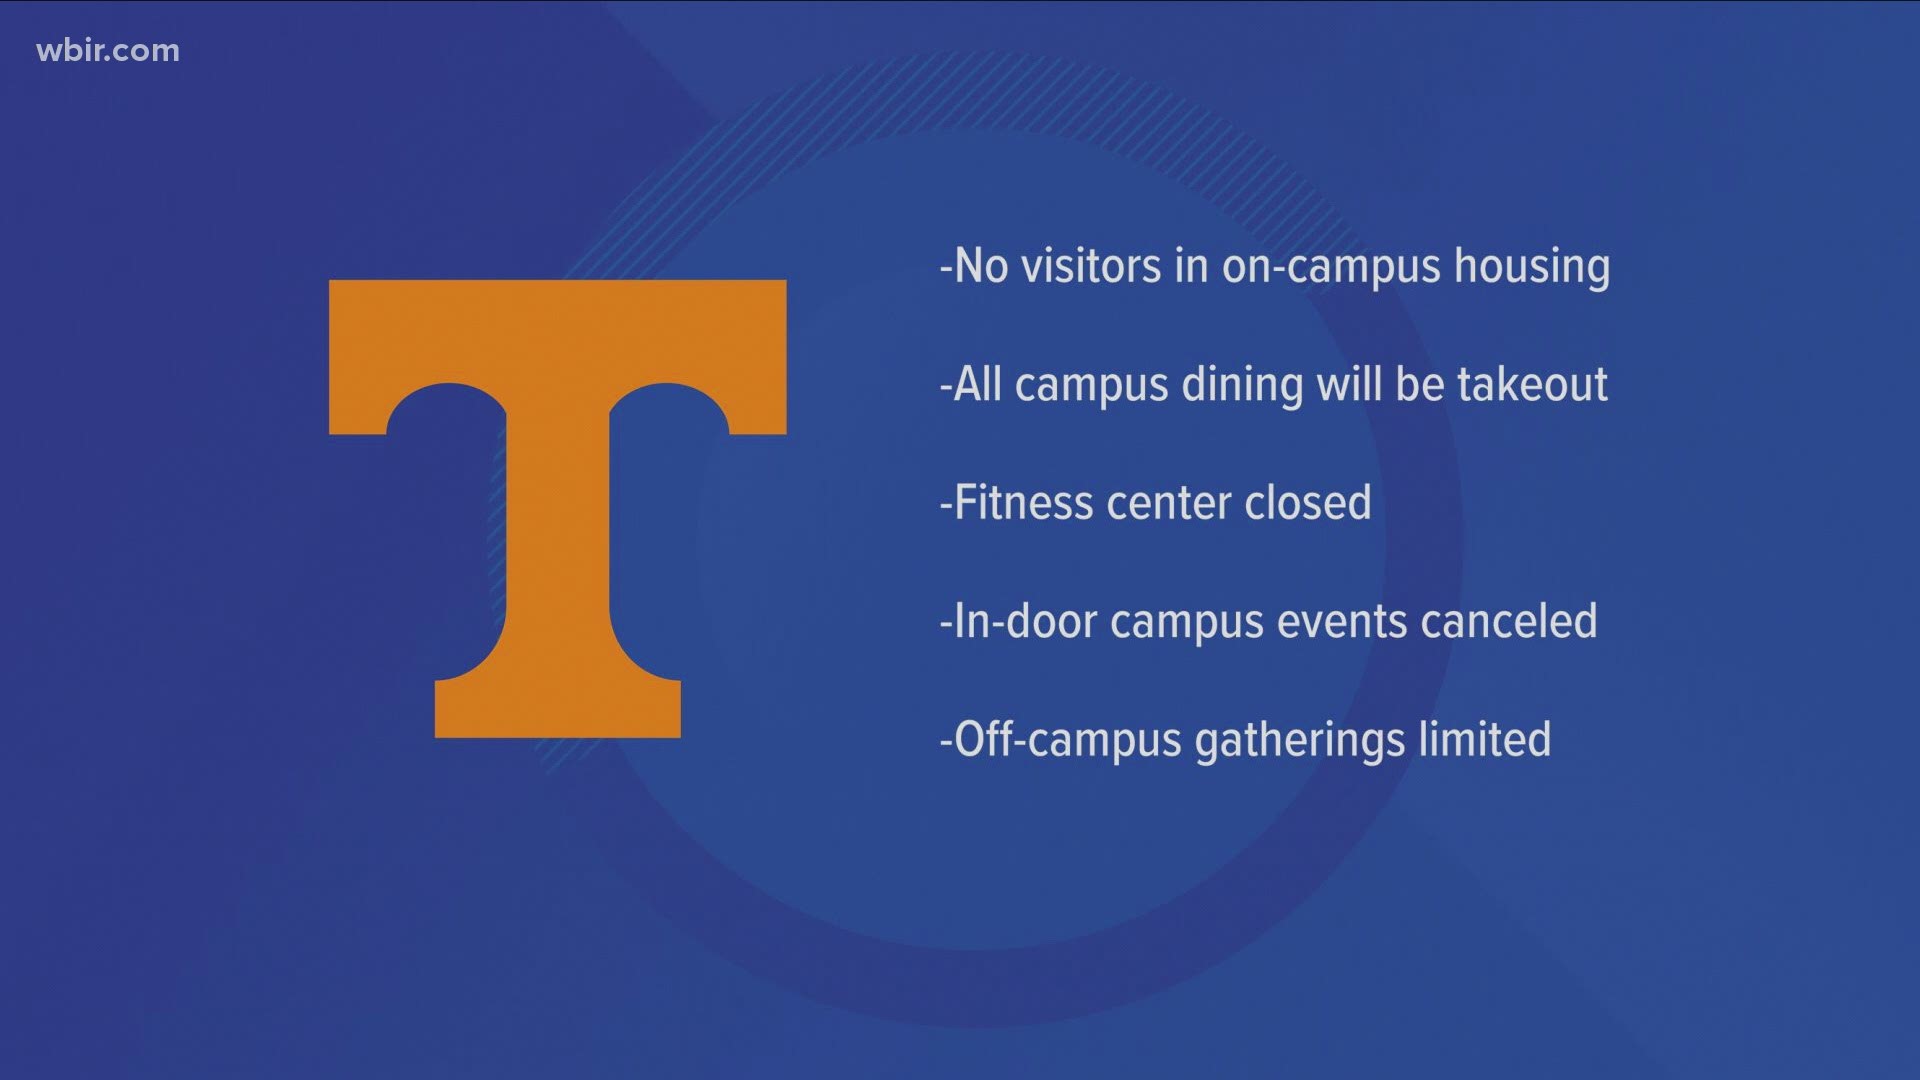 UT announced new rules Thursday they hope will stop a rise in COVID-19 cases among students.